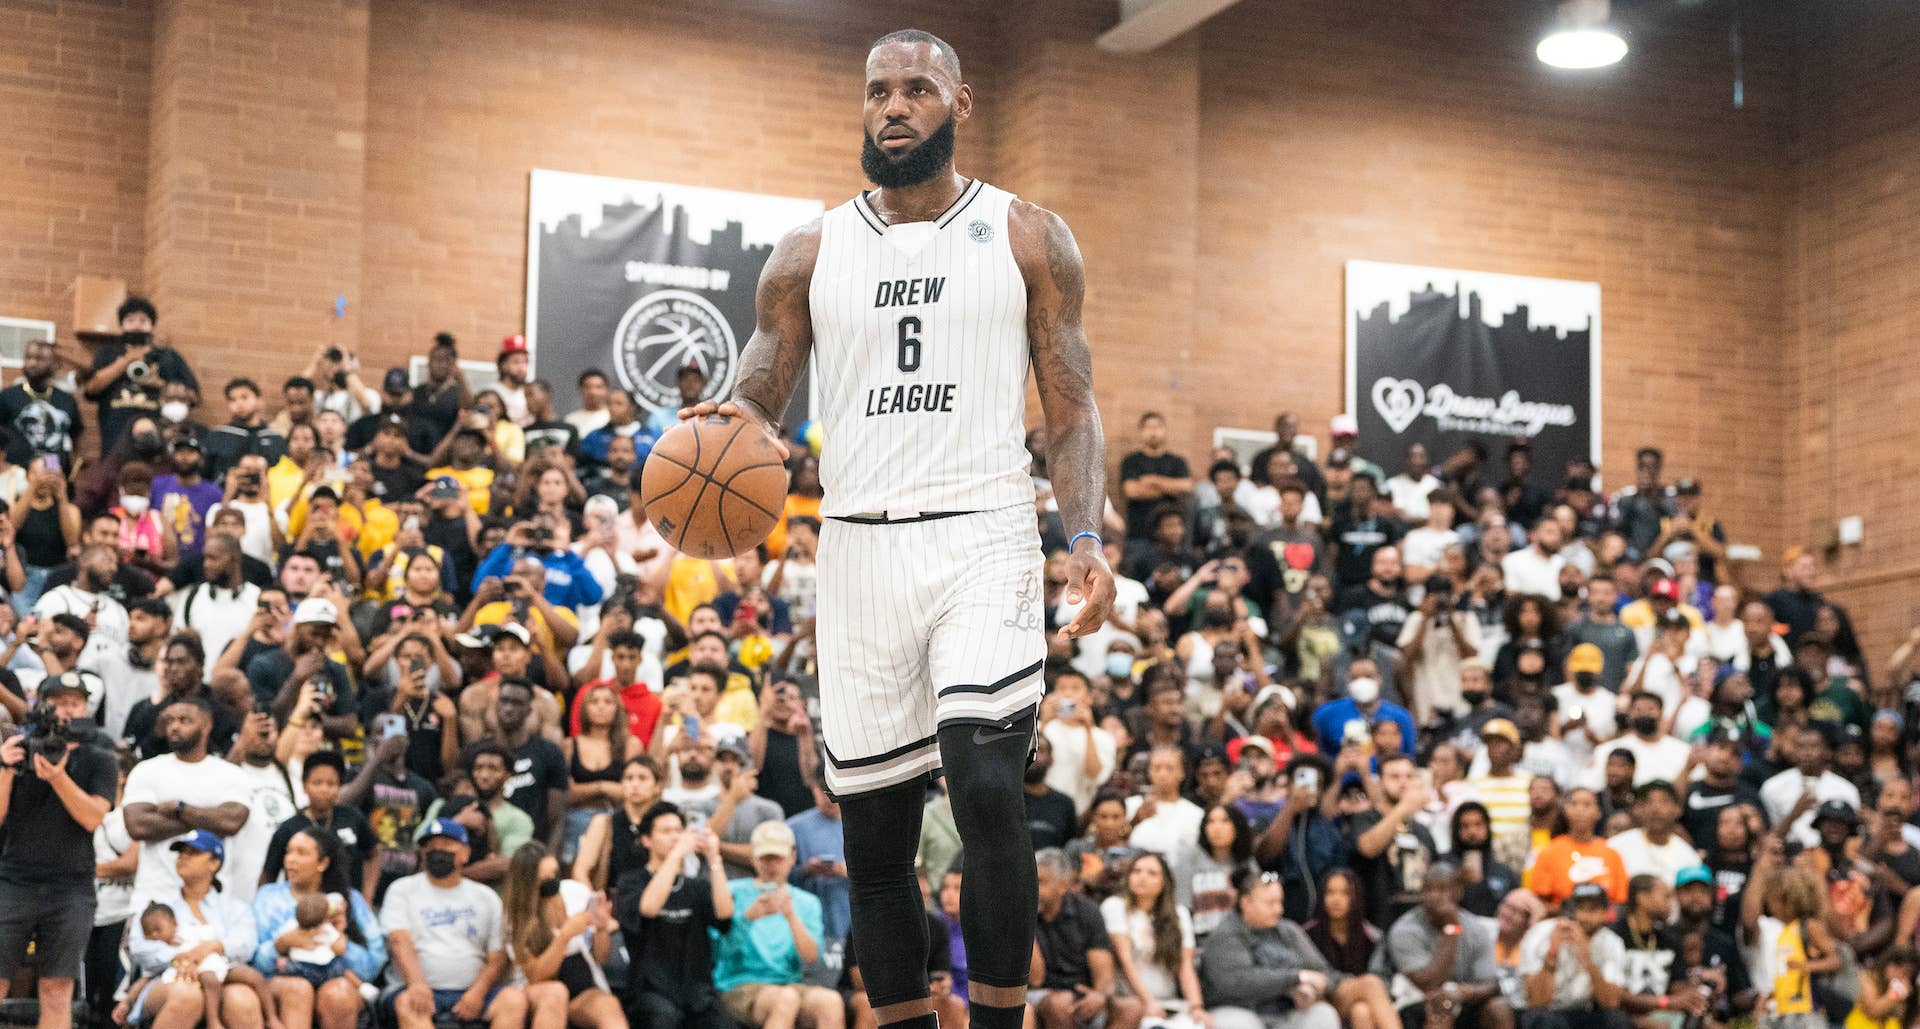 LeBron James plays in Drew League pro-am in Los Angeles